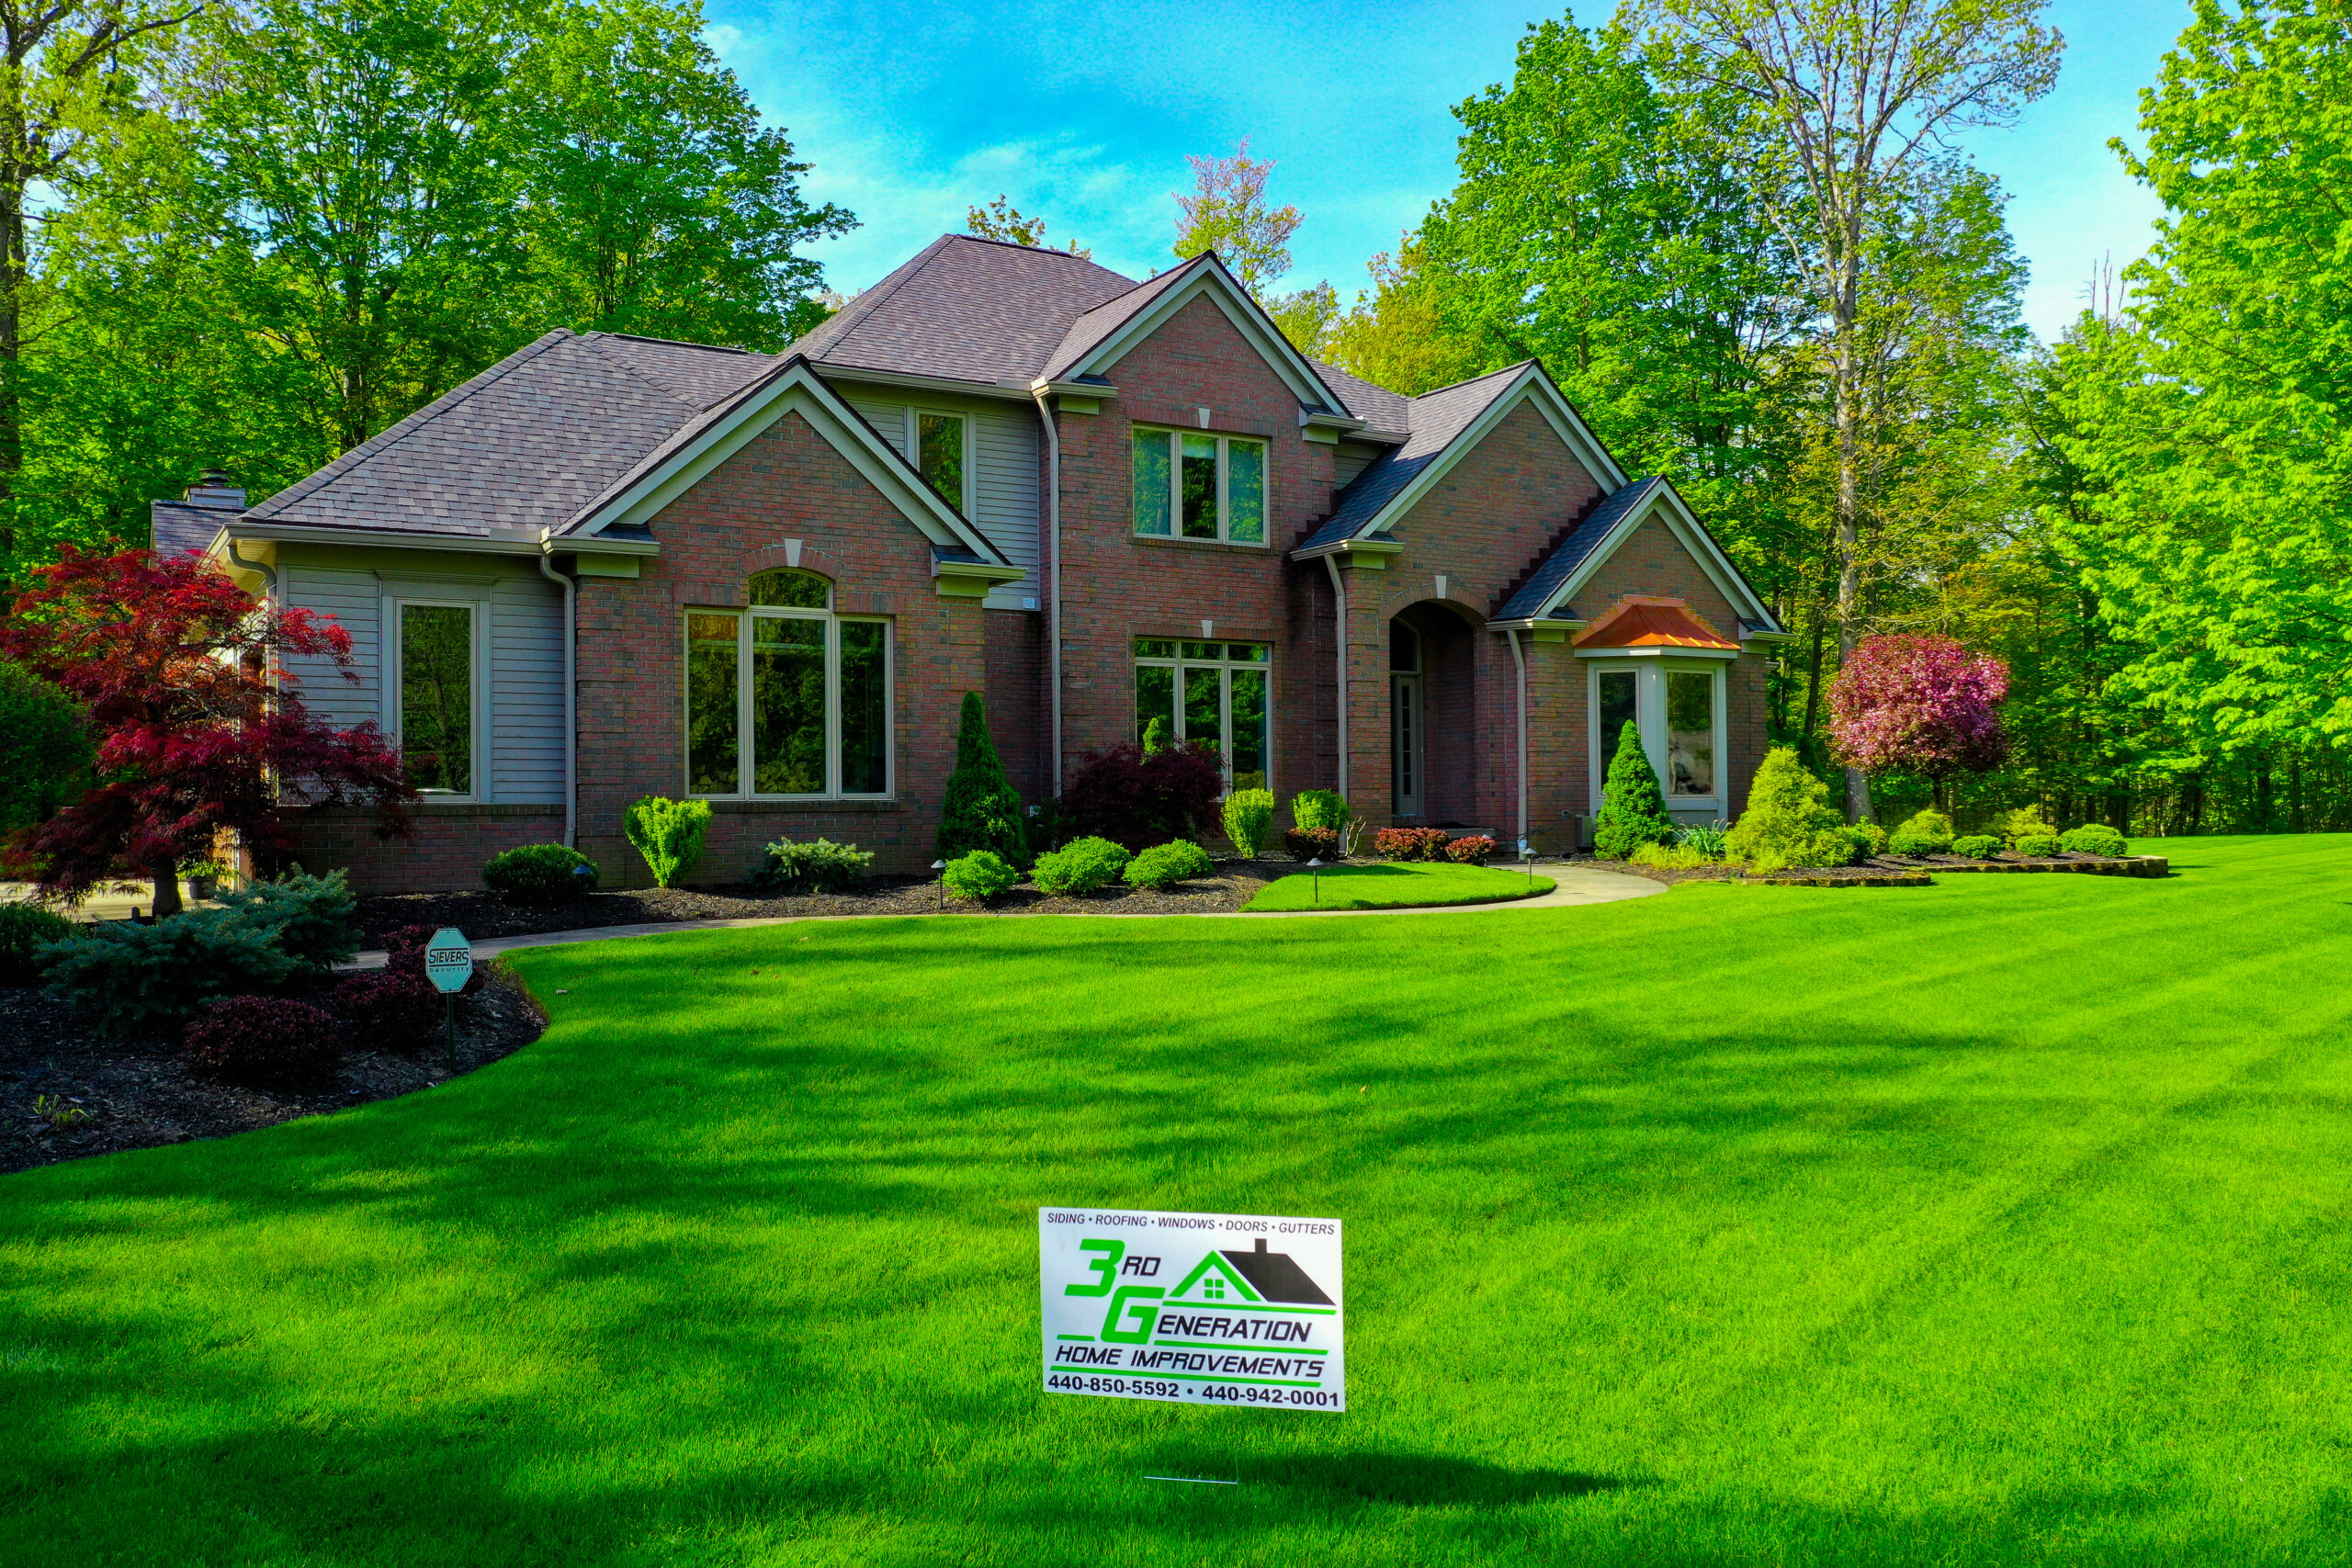 3rd Generation Home Improvements Cleveland OH Roofing contractor - shingle roofing job Kirtland OH